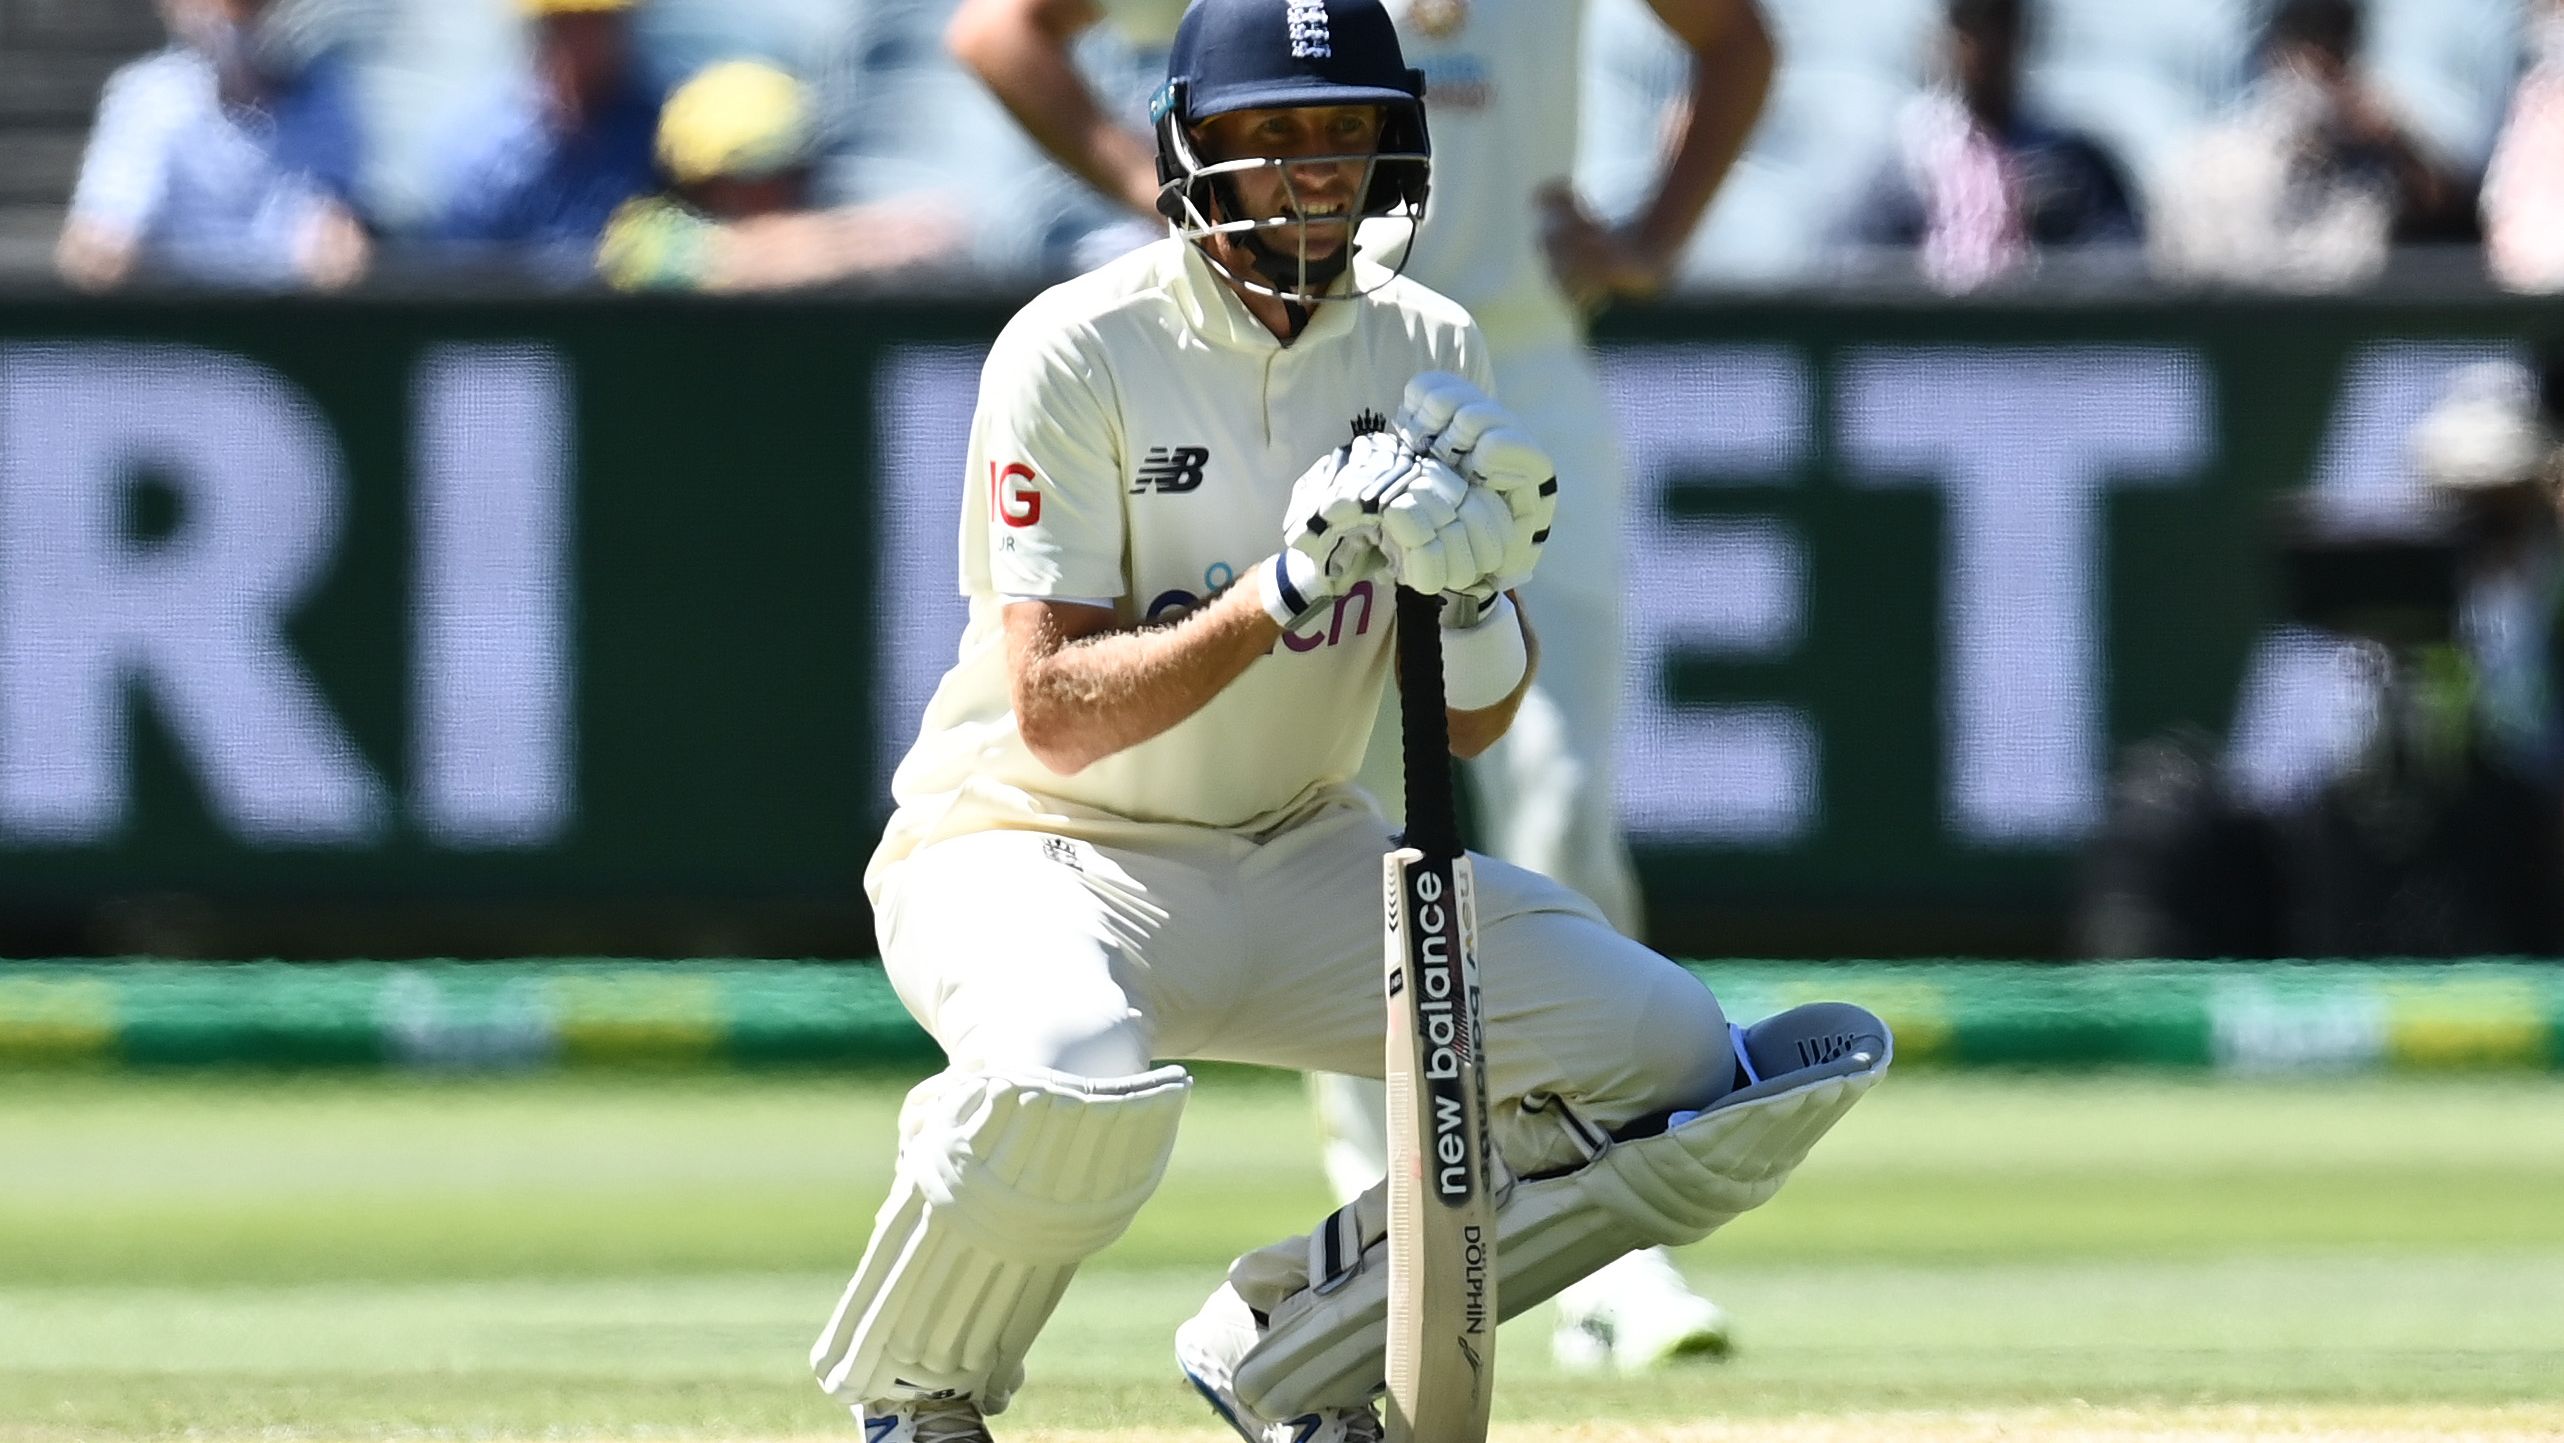 Joe Root of England recovers after being struck by a ball after a delivery from Pat Cummins during day three of the Third Test match in the Ashes series.